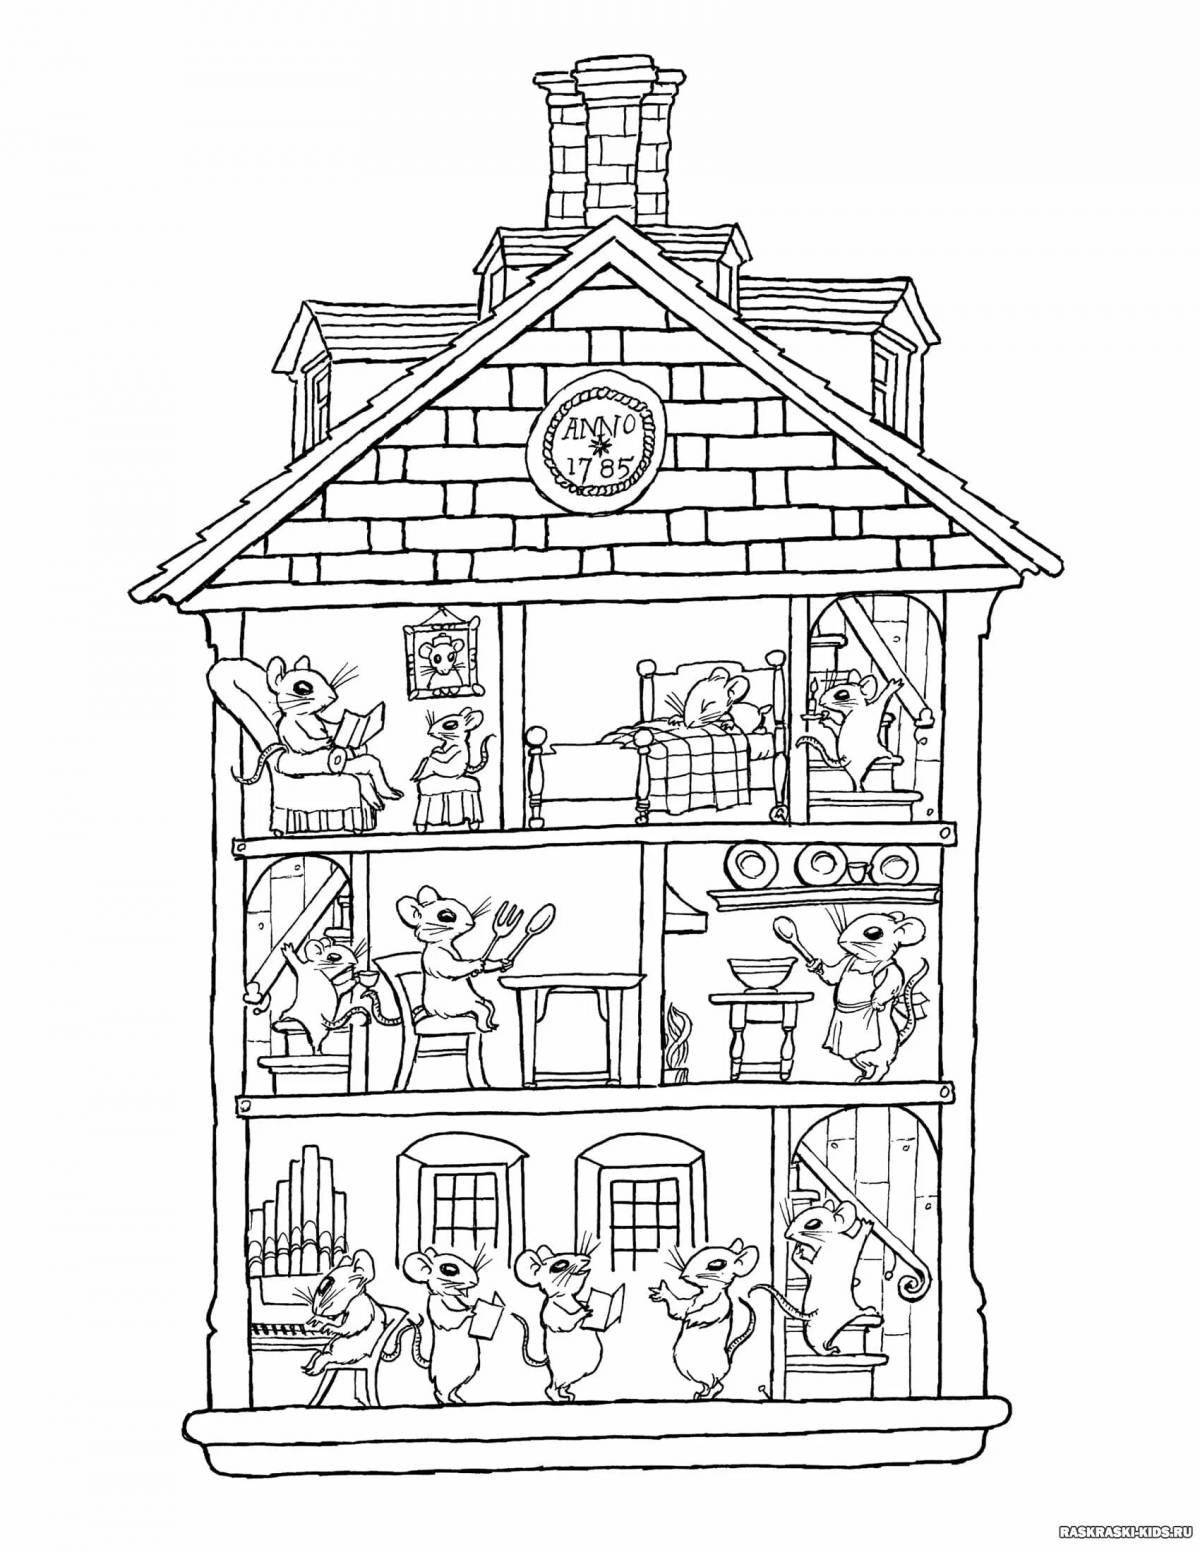 Impressive houses coloring pages for kids